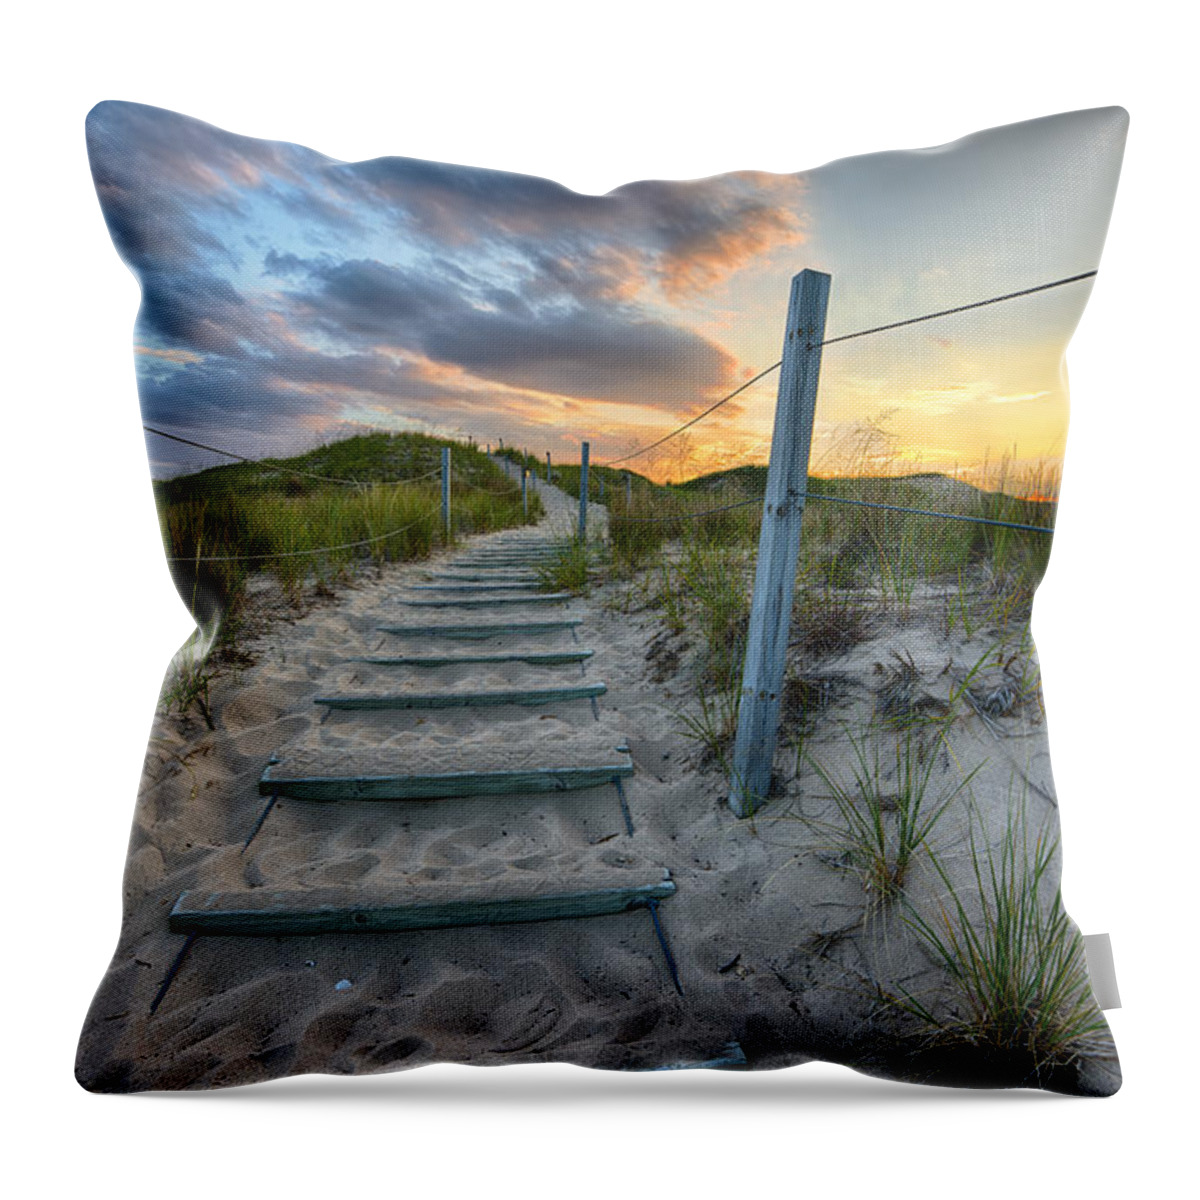 Sleeping Bear Dunes Throw Pillow featuring the photograph Path Over The Dunes by Sebastian Musial